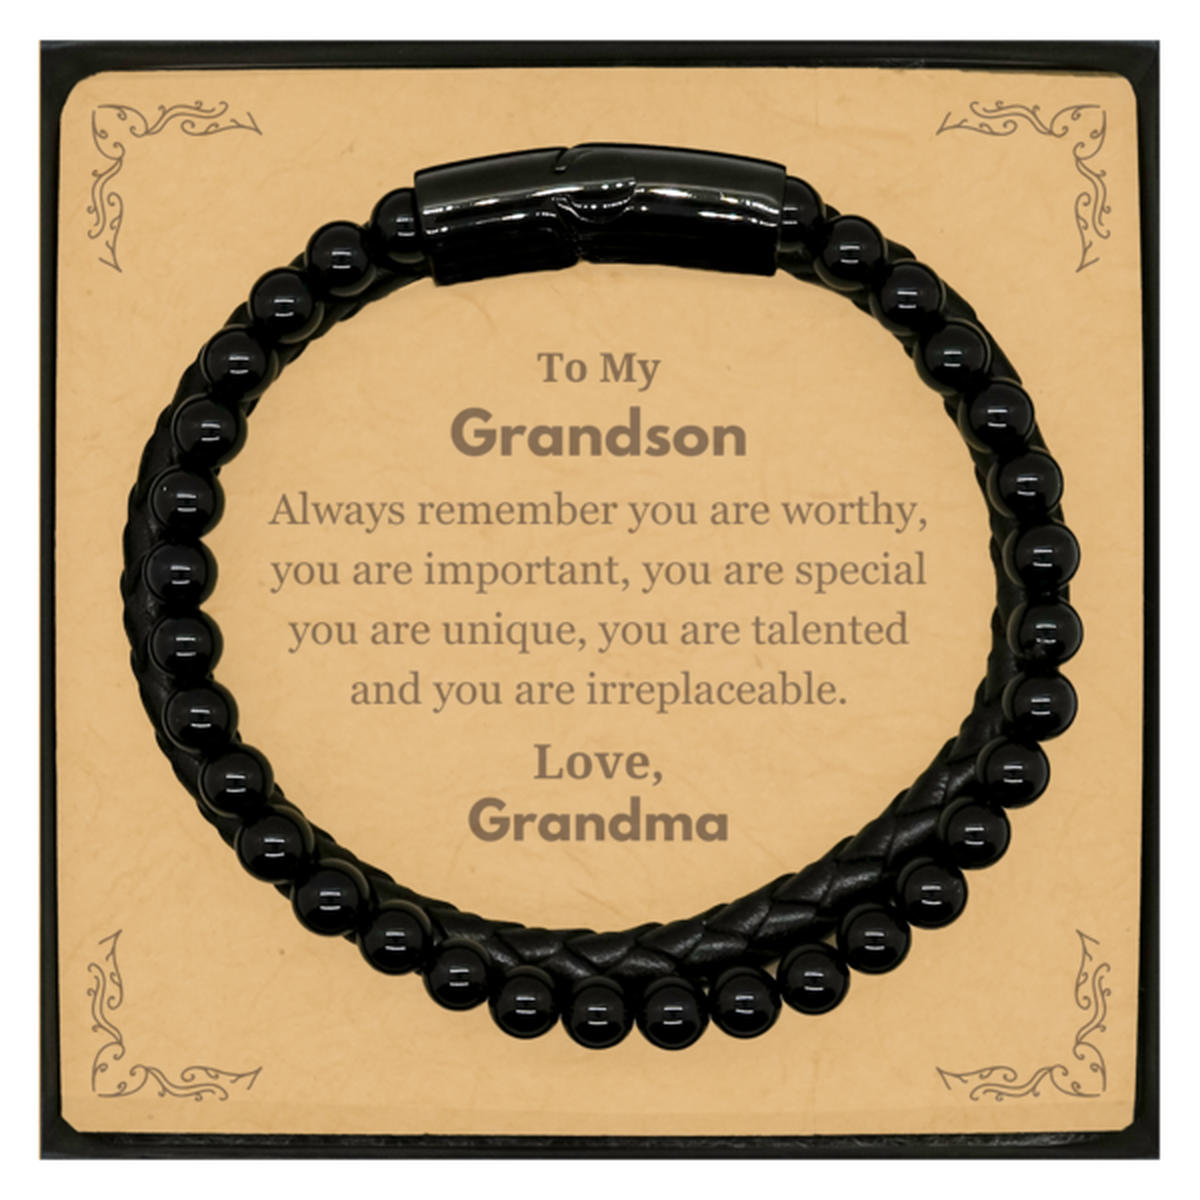 Grandson Birthday Gifts from Grandma, Inspirational Stone Leather Bracelets for Grandson Christmas Graduation Gifts for Grandson Always remember you are worthy, you are important. Love, Grandma